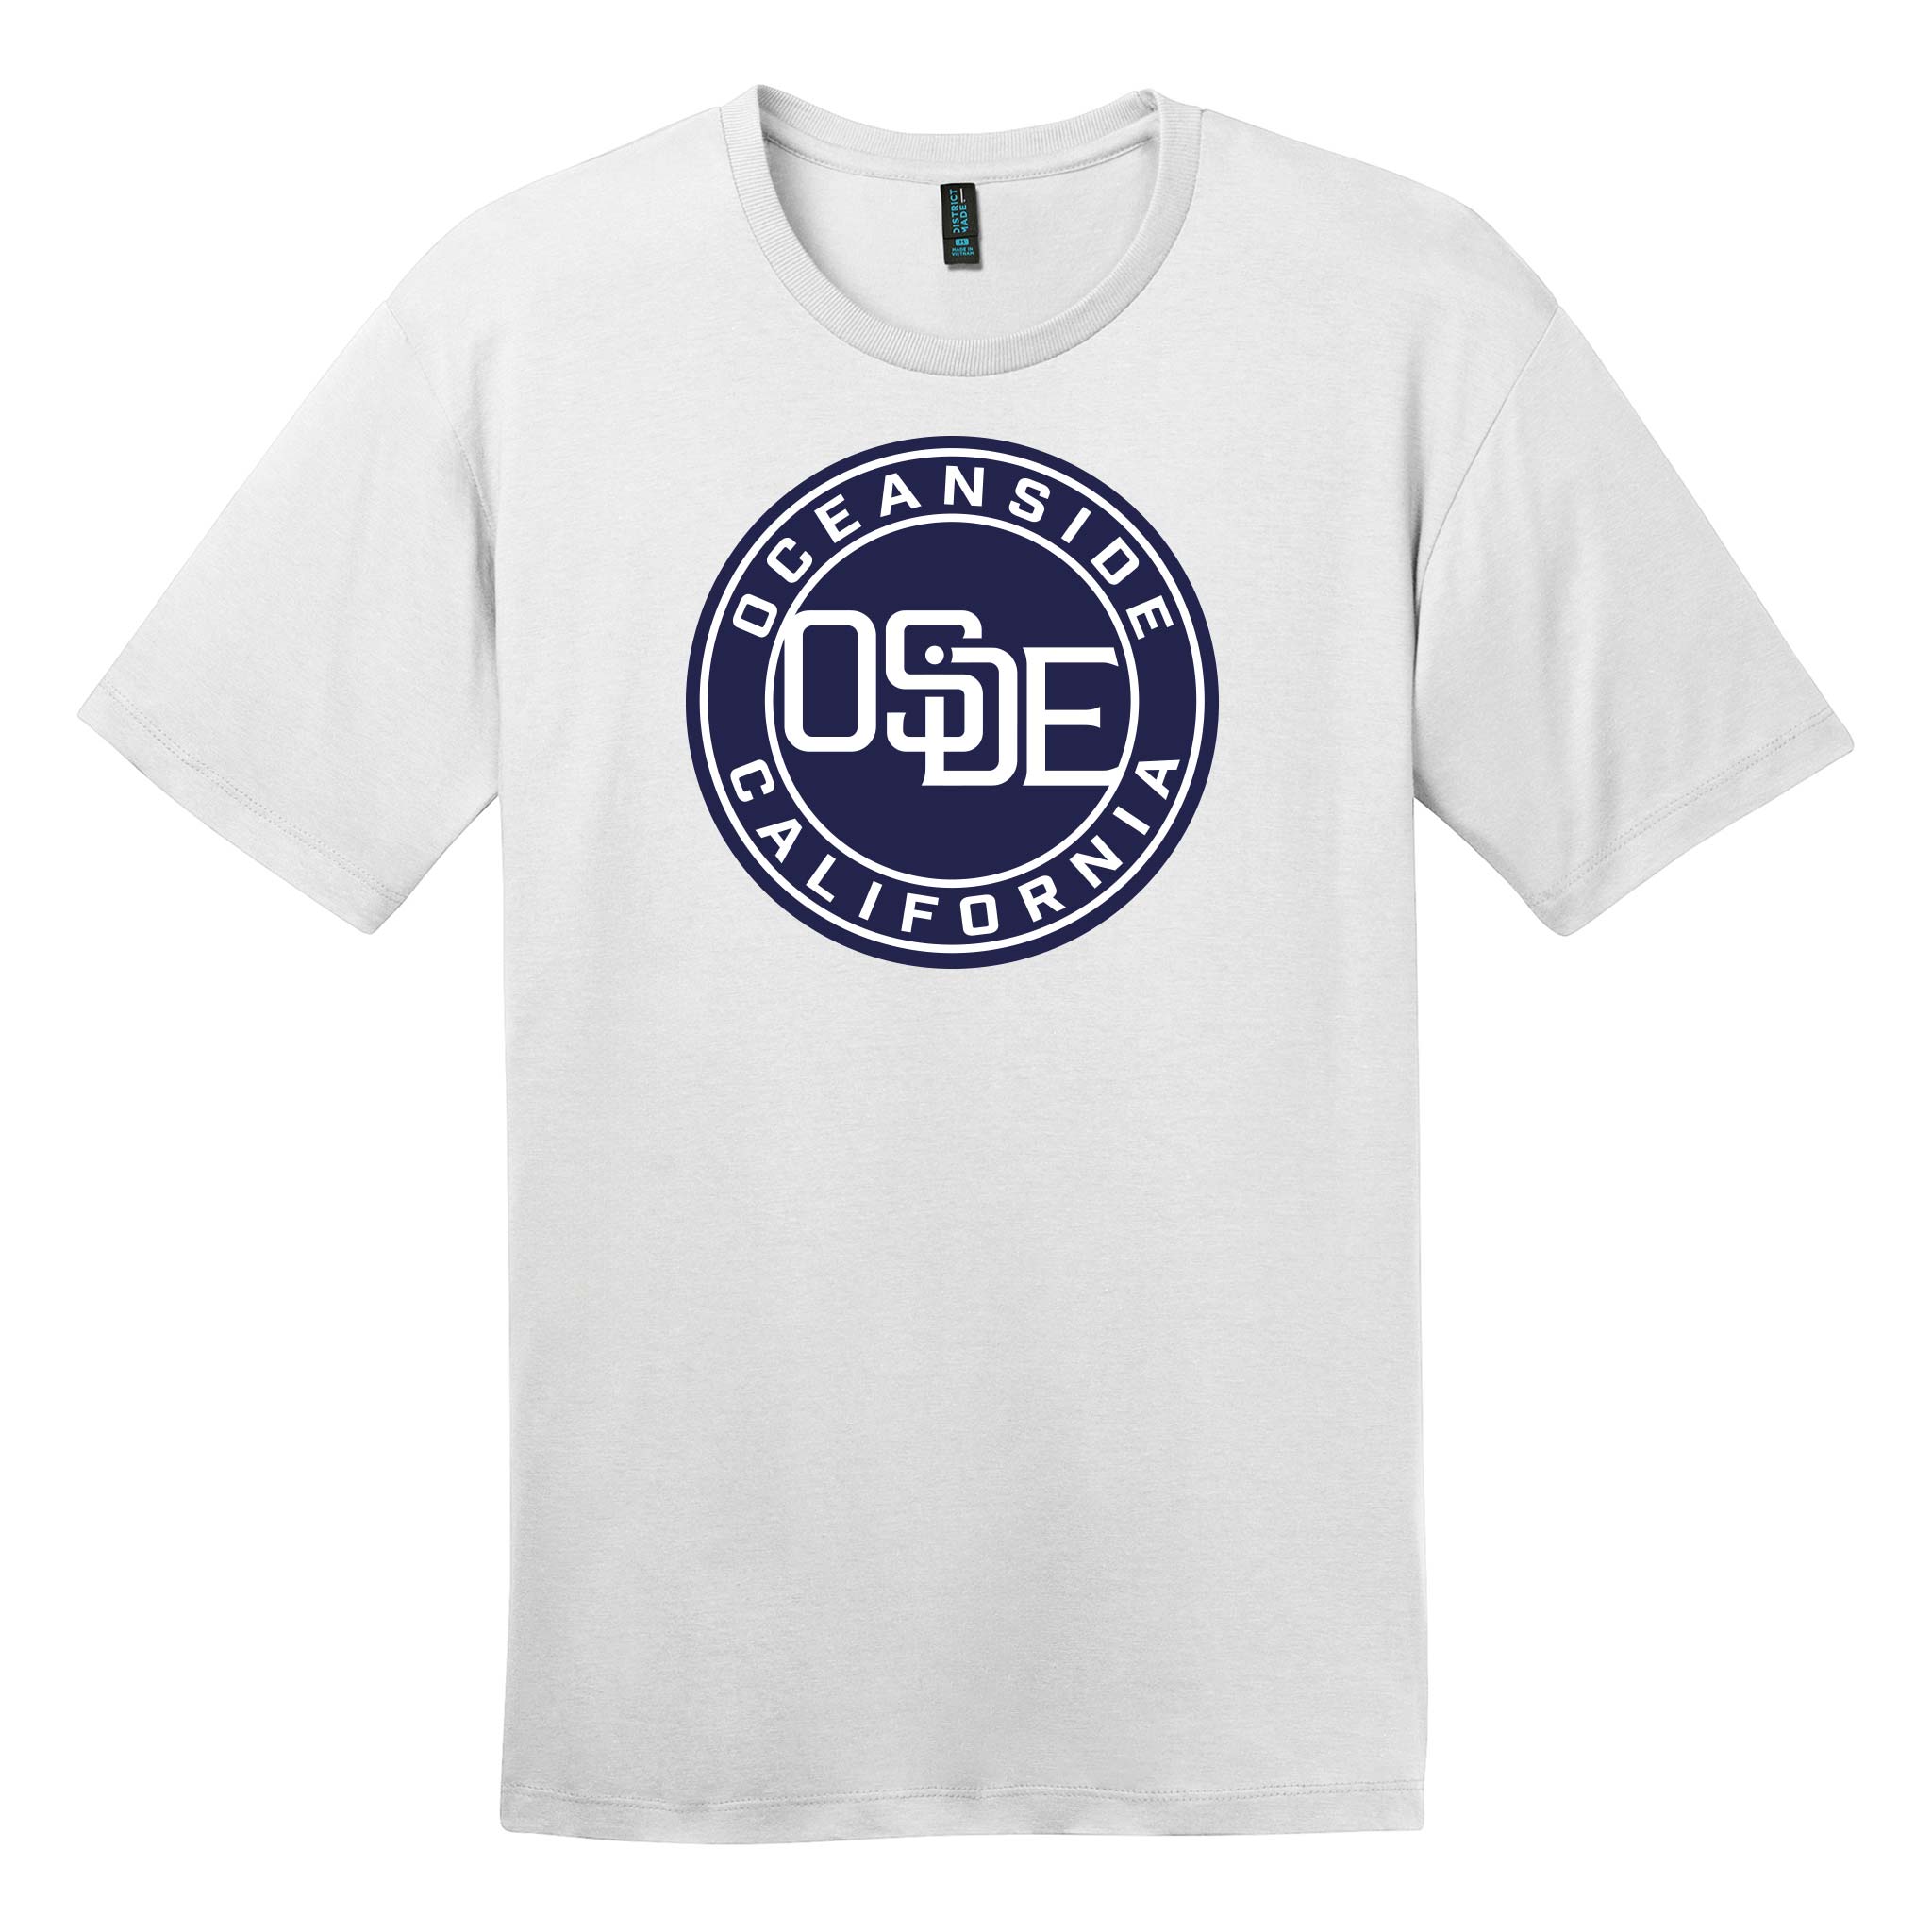 Express T-Shirt - White and Navy Blue